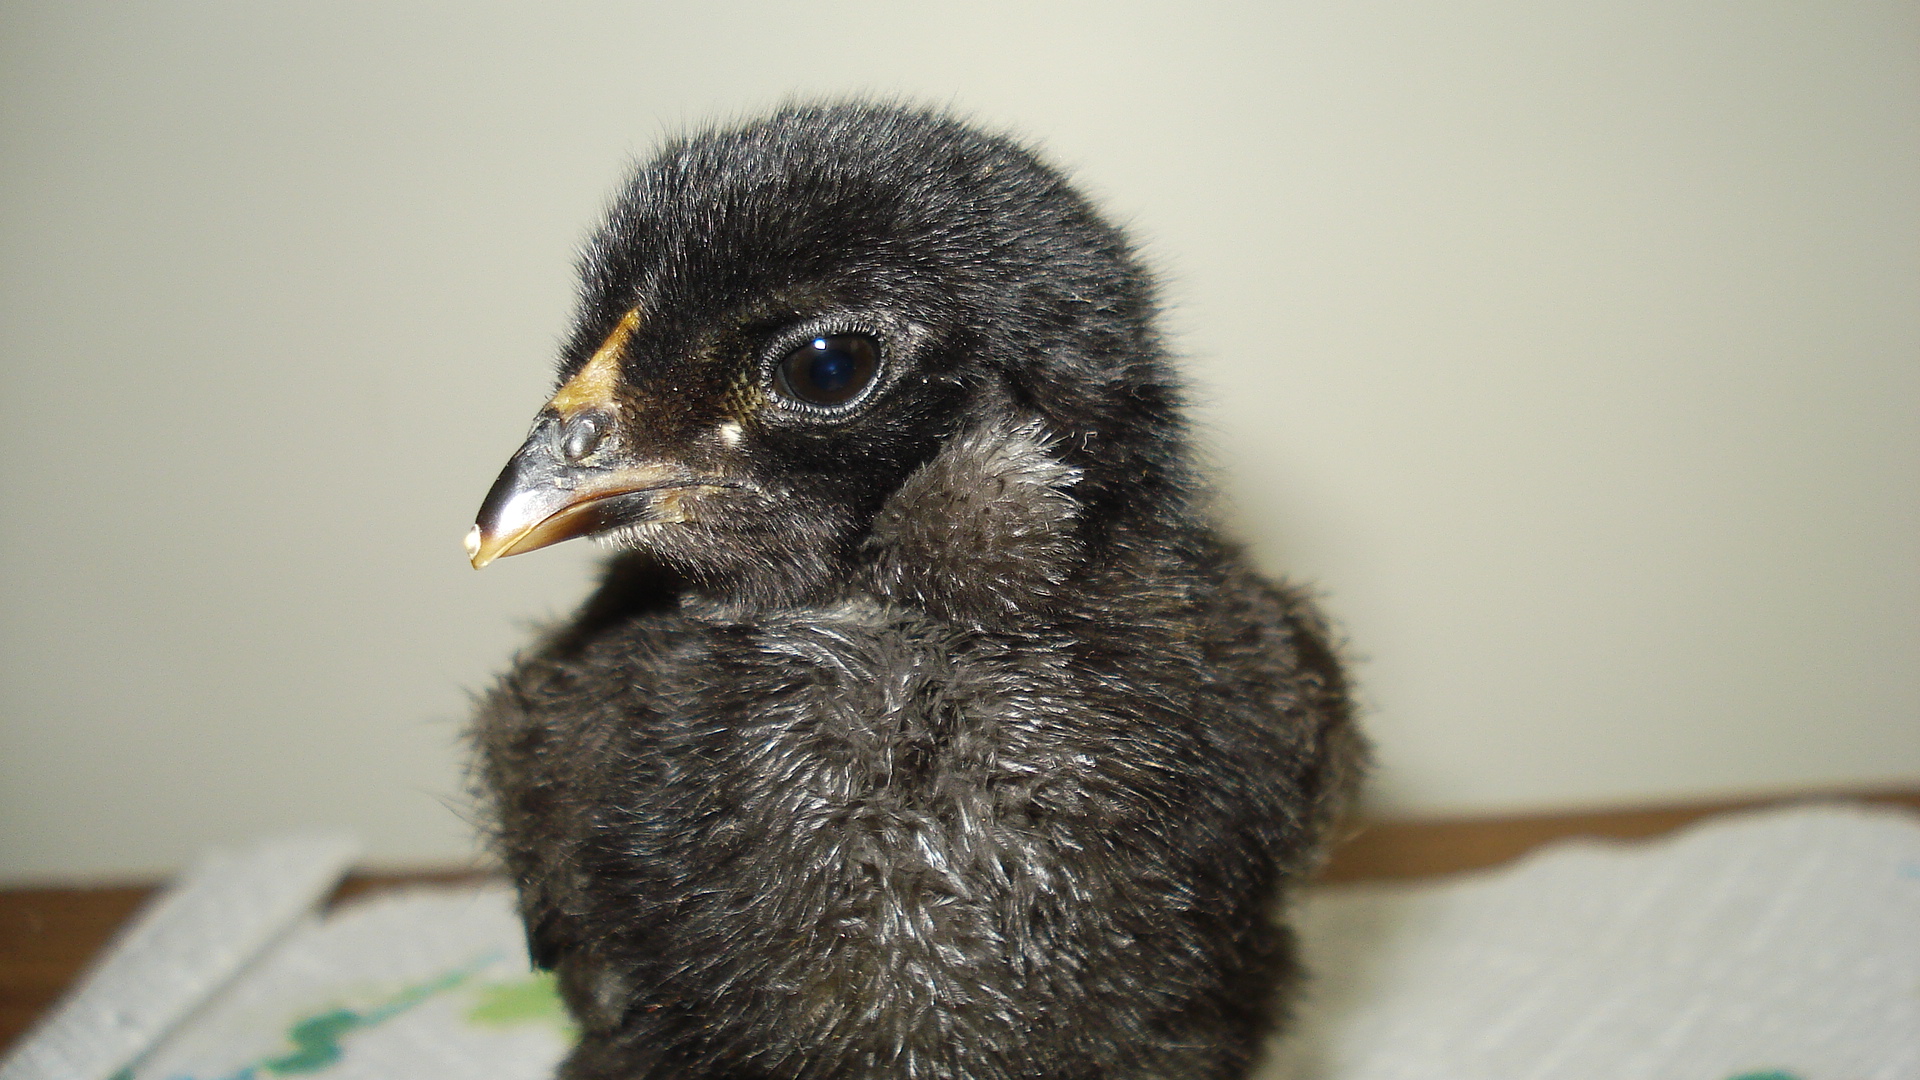 Chick from eggs due 6/5/12